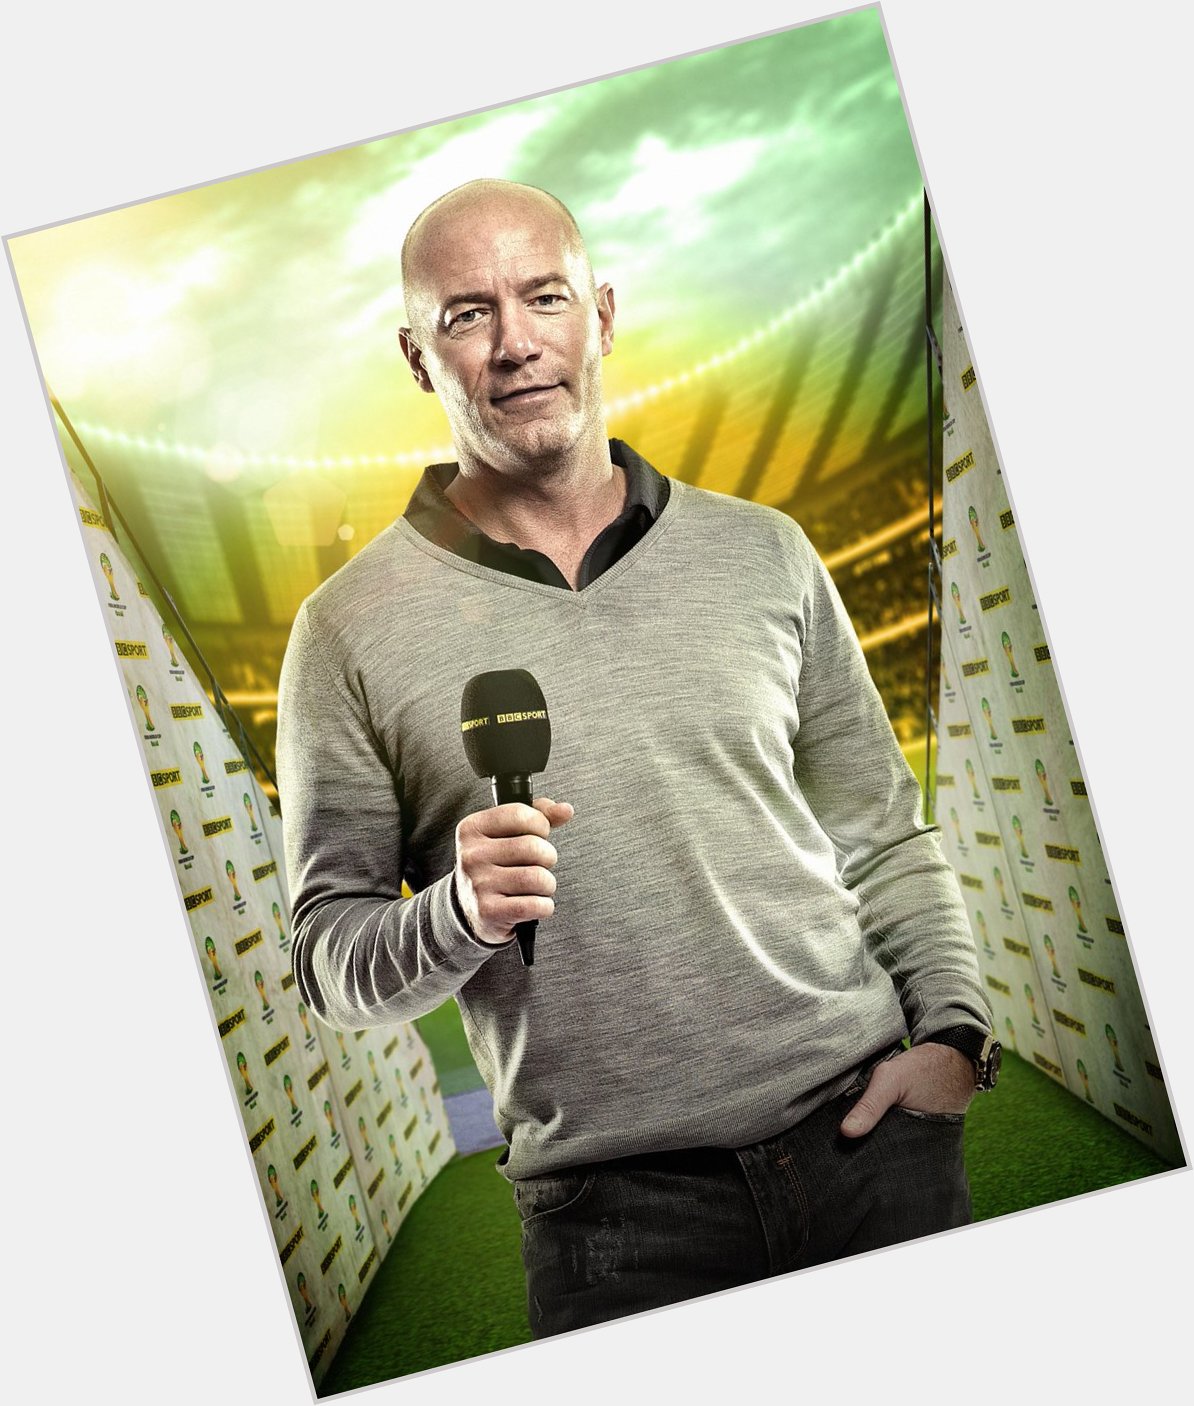 Happy Birthday to Match of the Day\s Alan Shearer! Last week our readers voted Al their favourite pundit!  